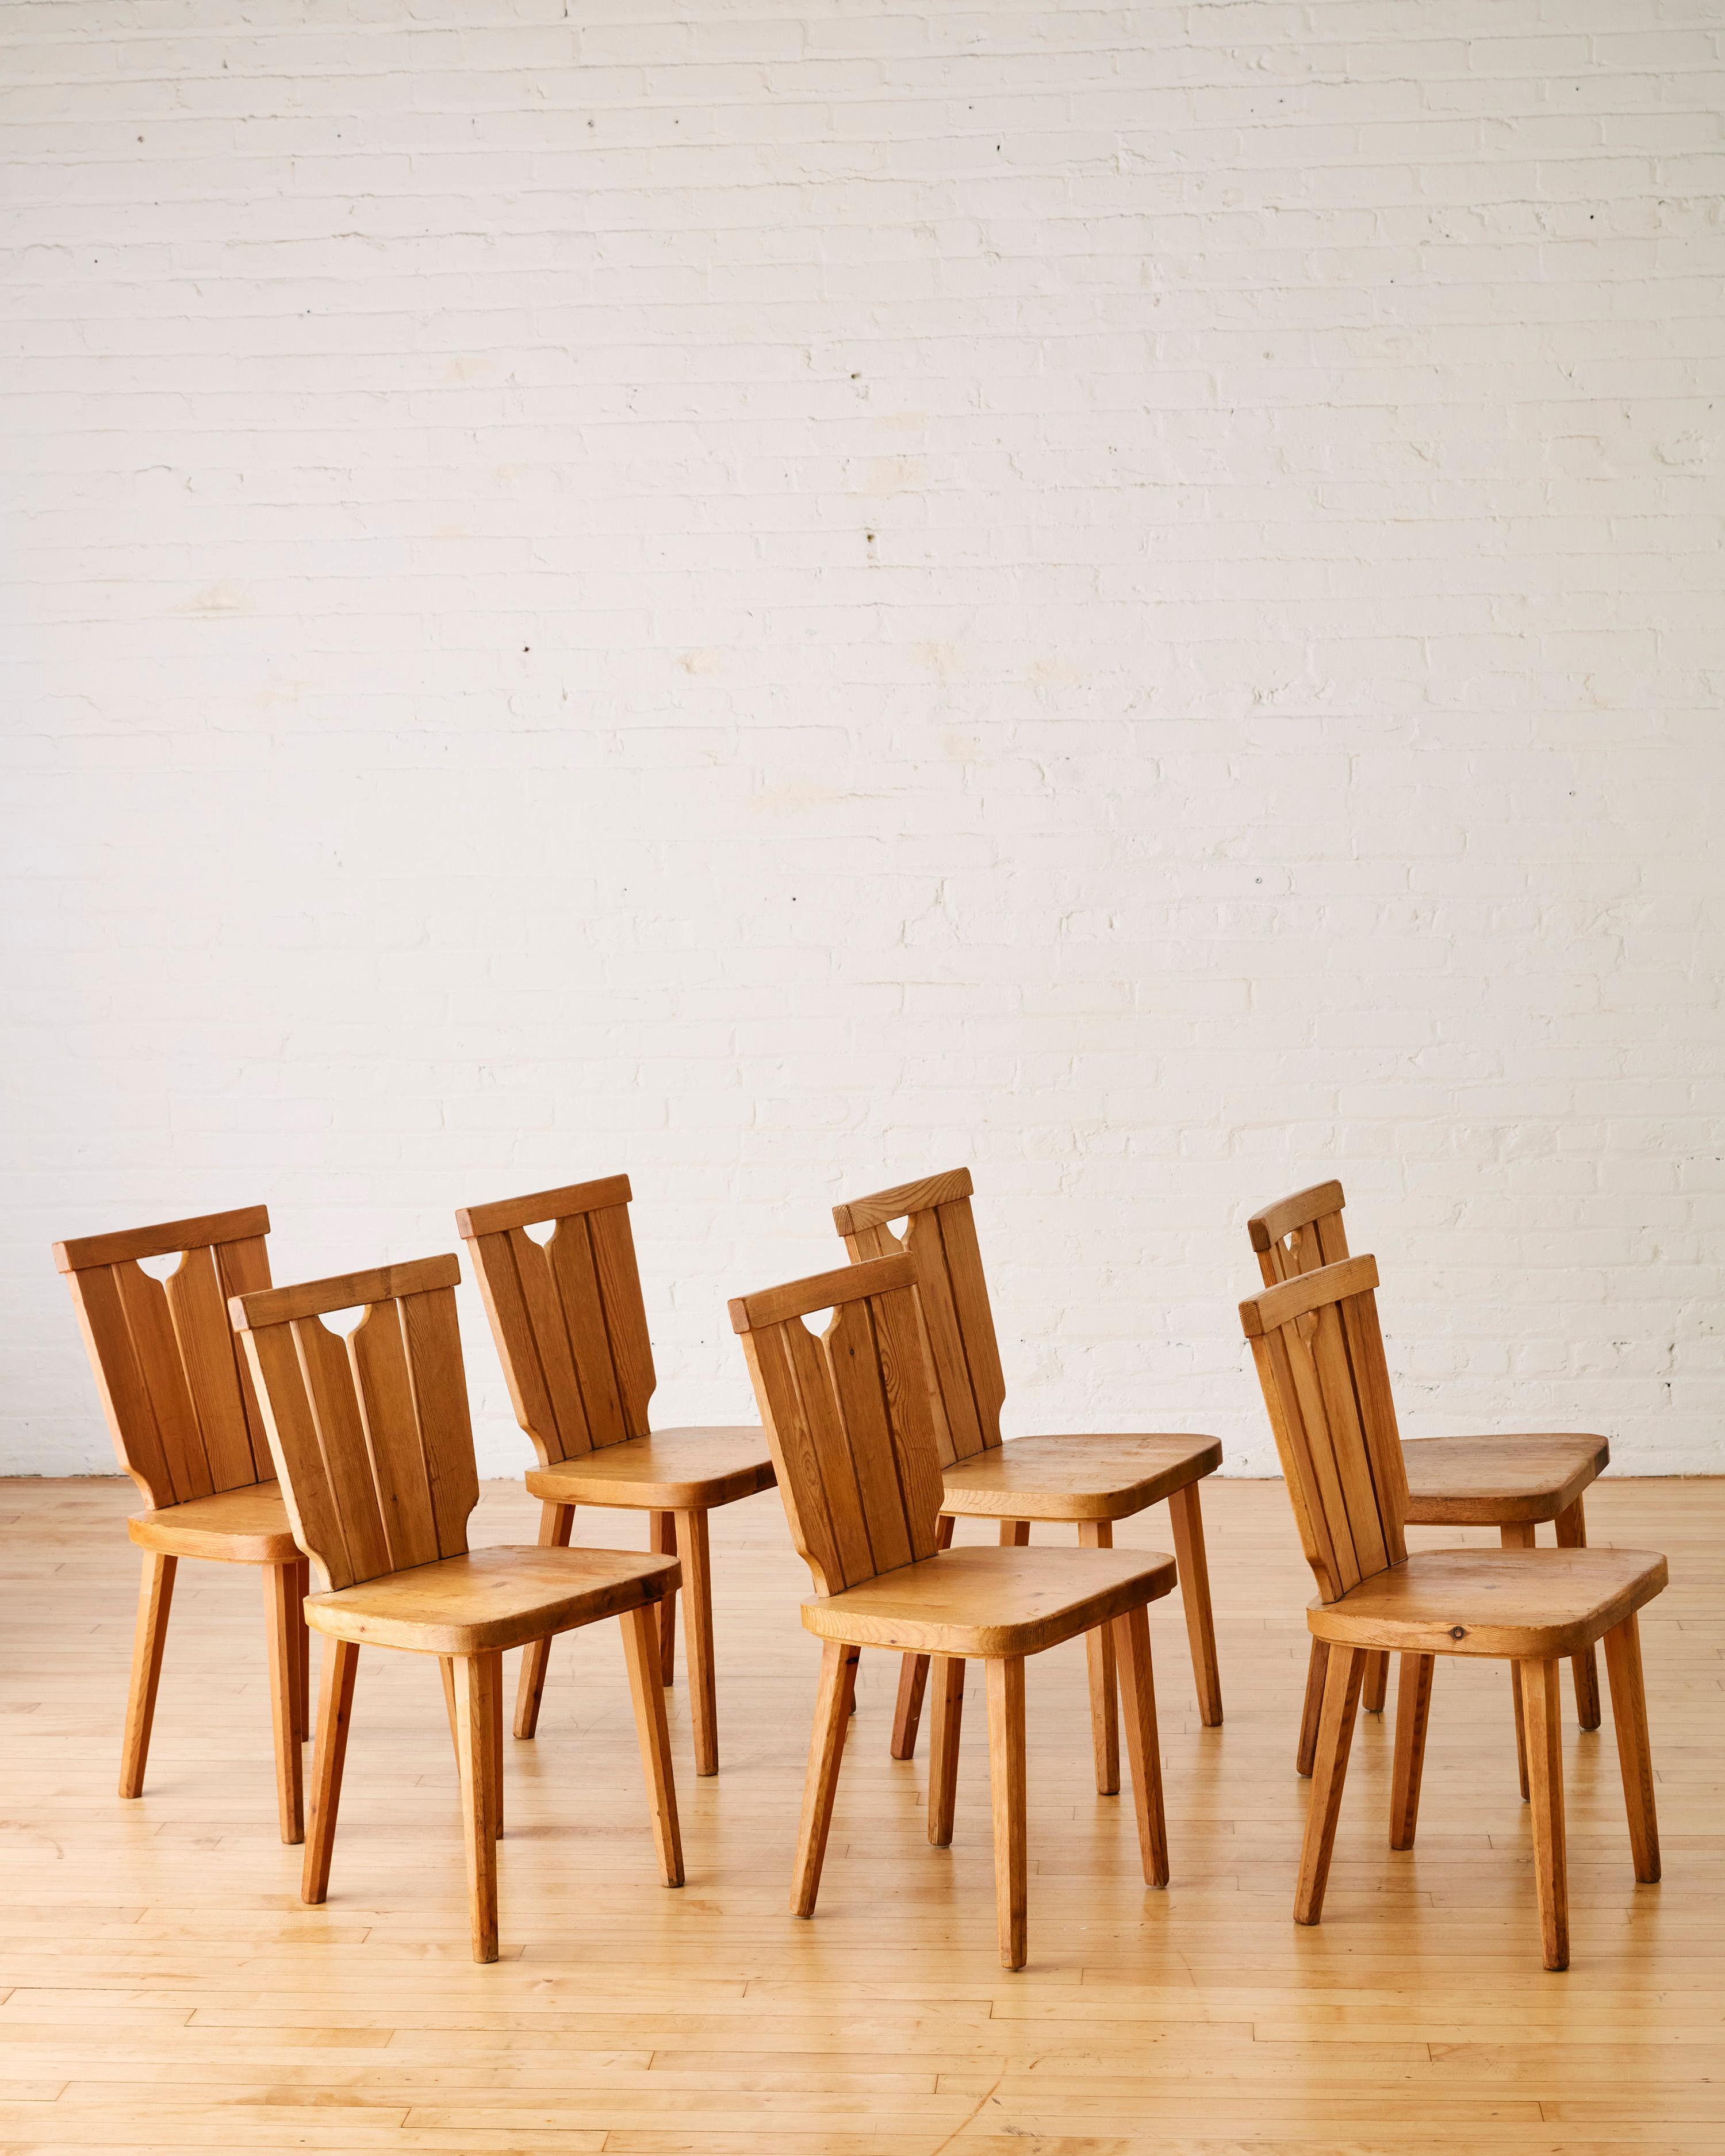 A set of seven Swedish pine dining chairs by Goran Malmvall featuring a slatted back rest. 

Göran Malmvall (1917-2001), was born into the furniture & design industry. As the youngest son of the founder Karl Andersson of Karl Andersson & Sons/Söner.